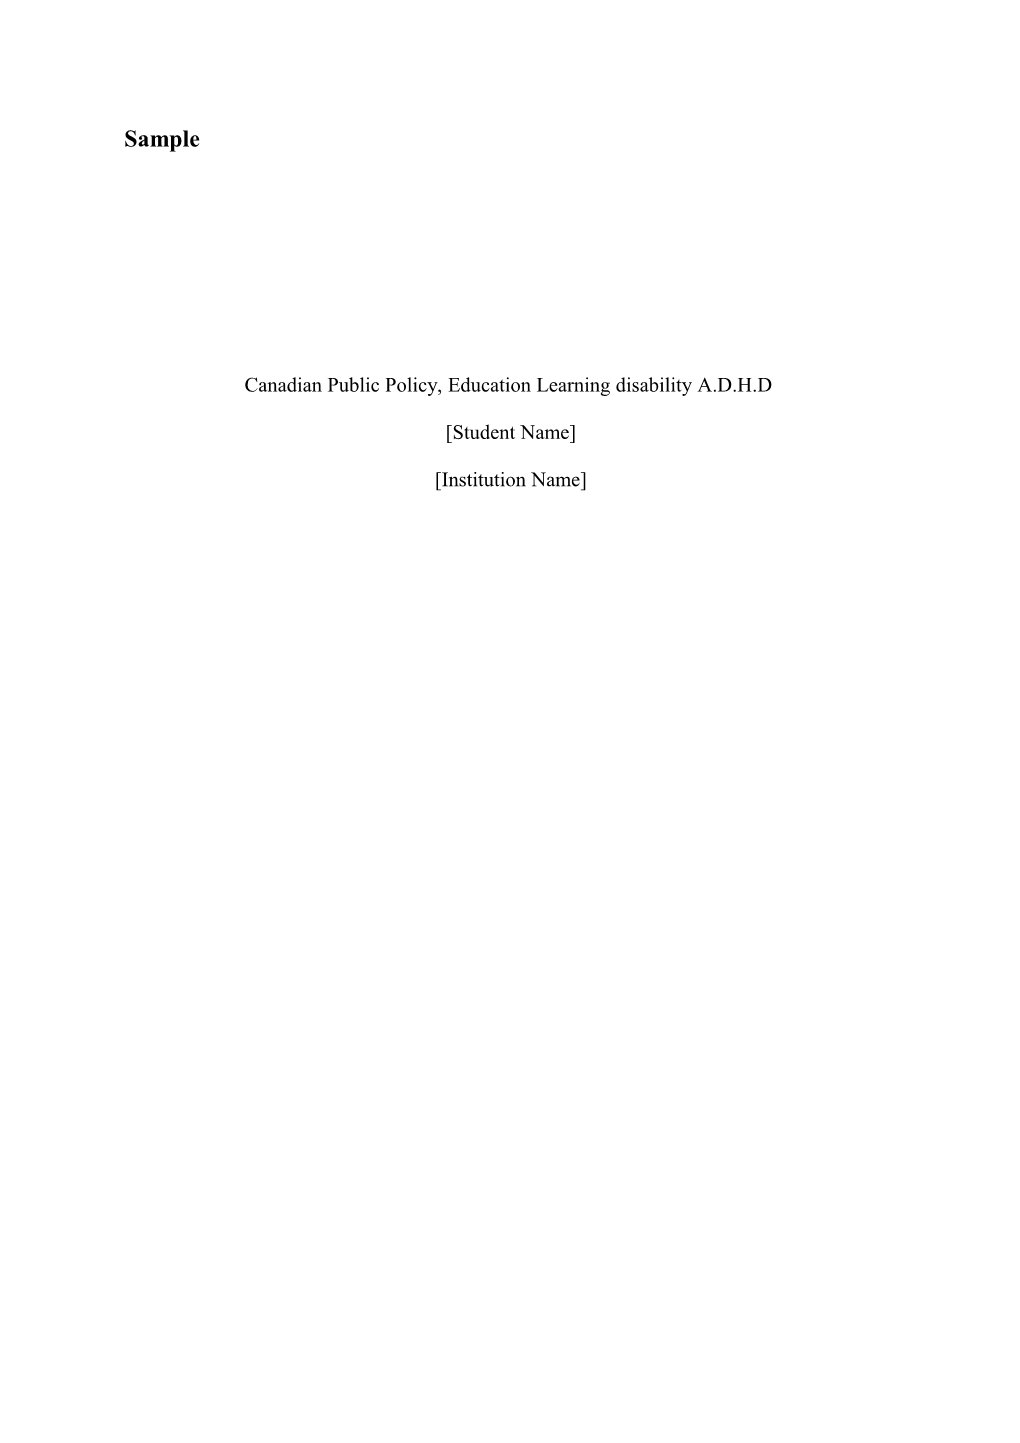 Canadian Public Policy, Education Learning Disability A.D.H.D